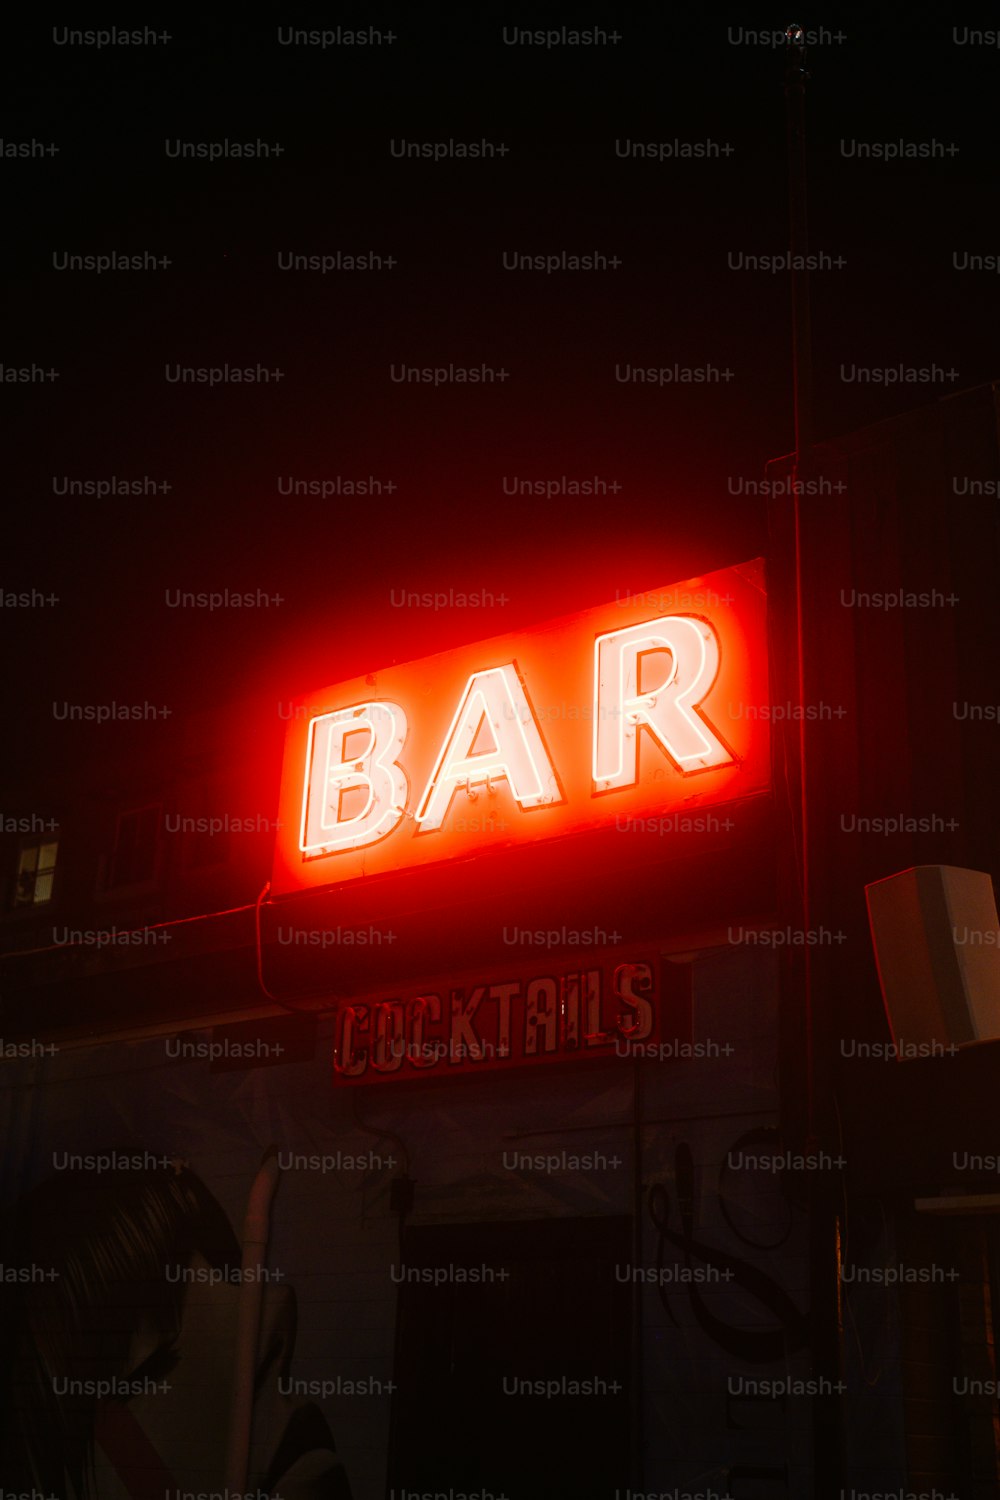 a bar sign lit up in the dark